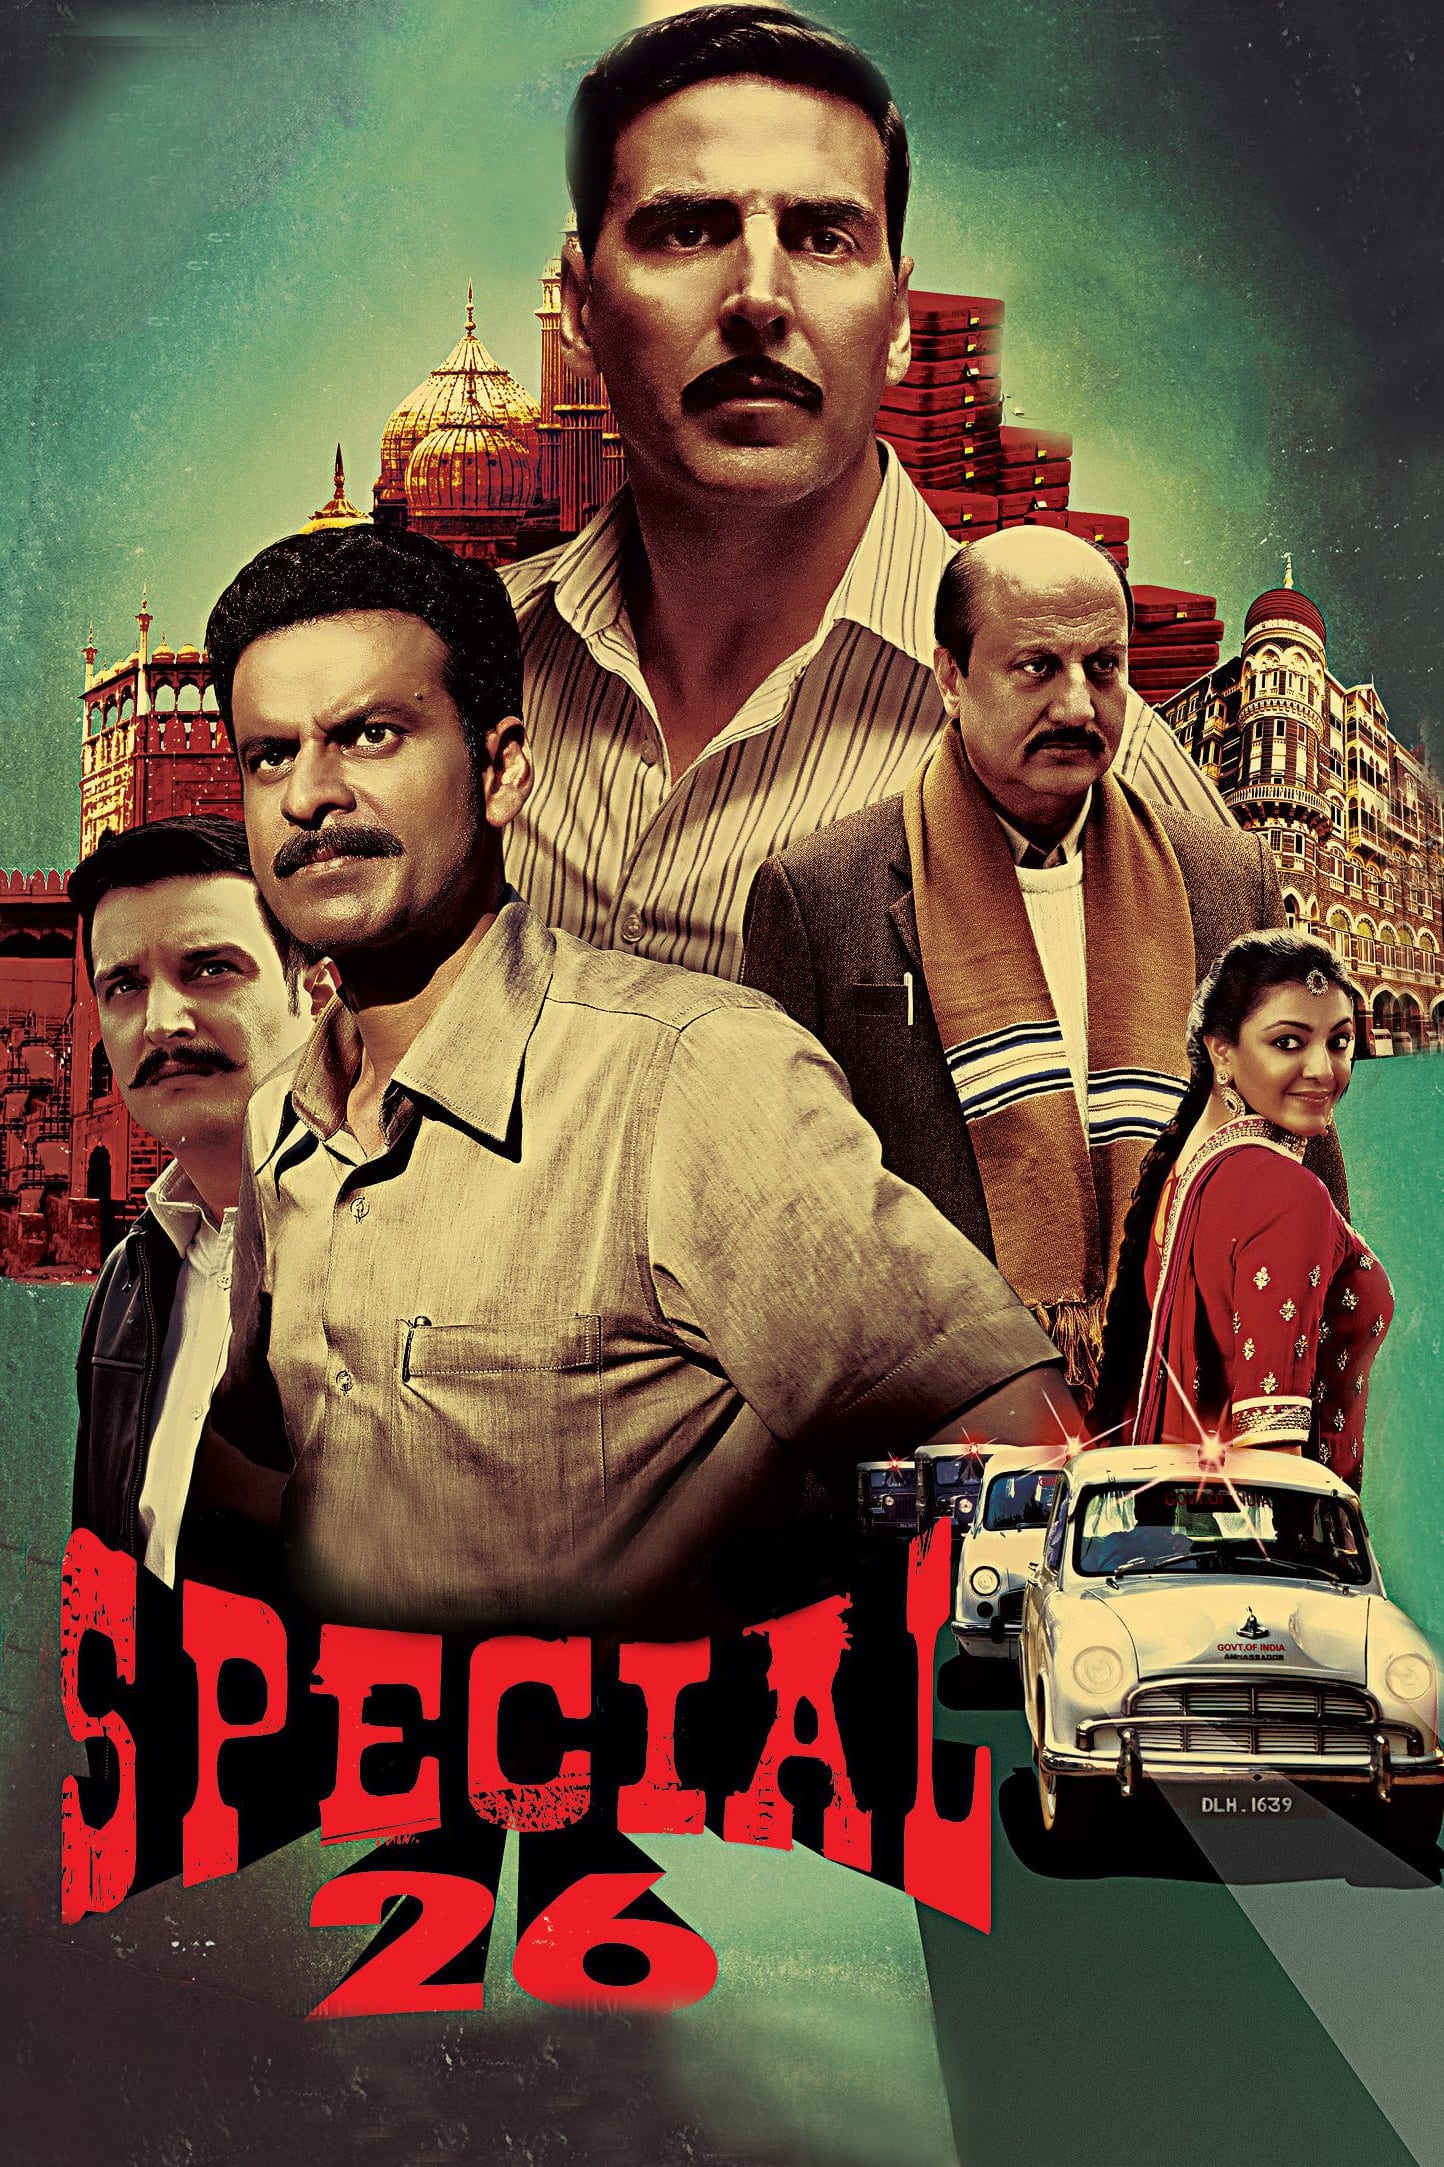 Poster for the movie "Special 26"